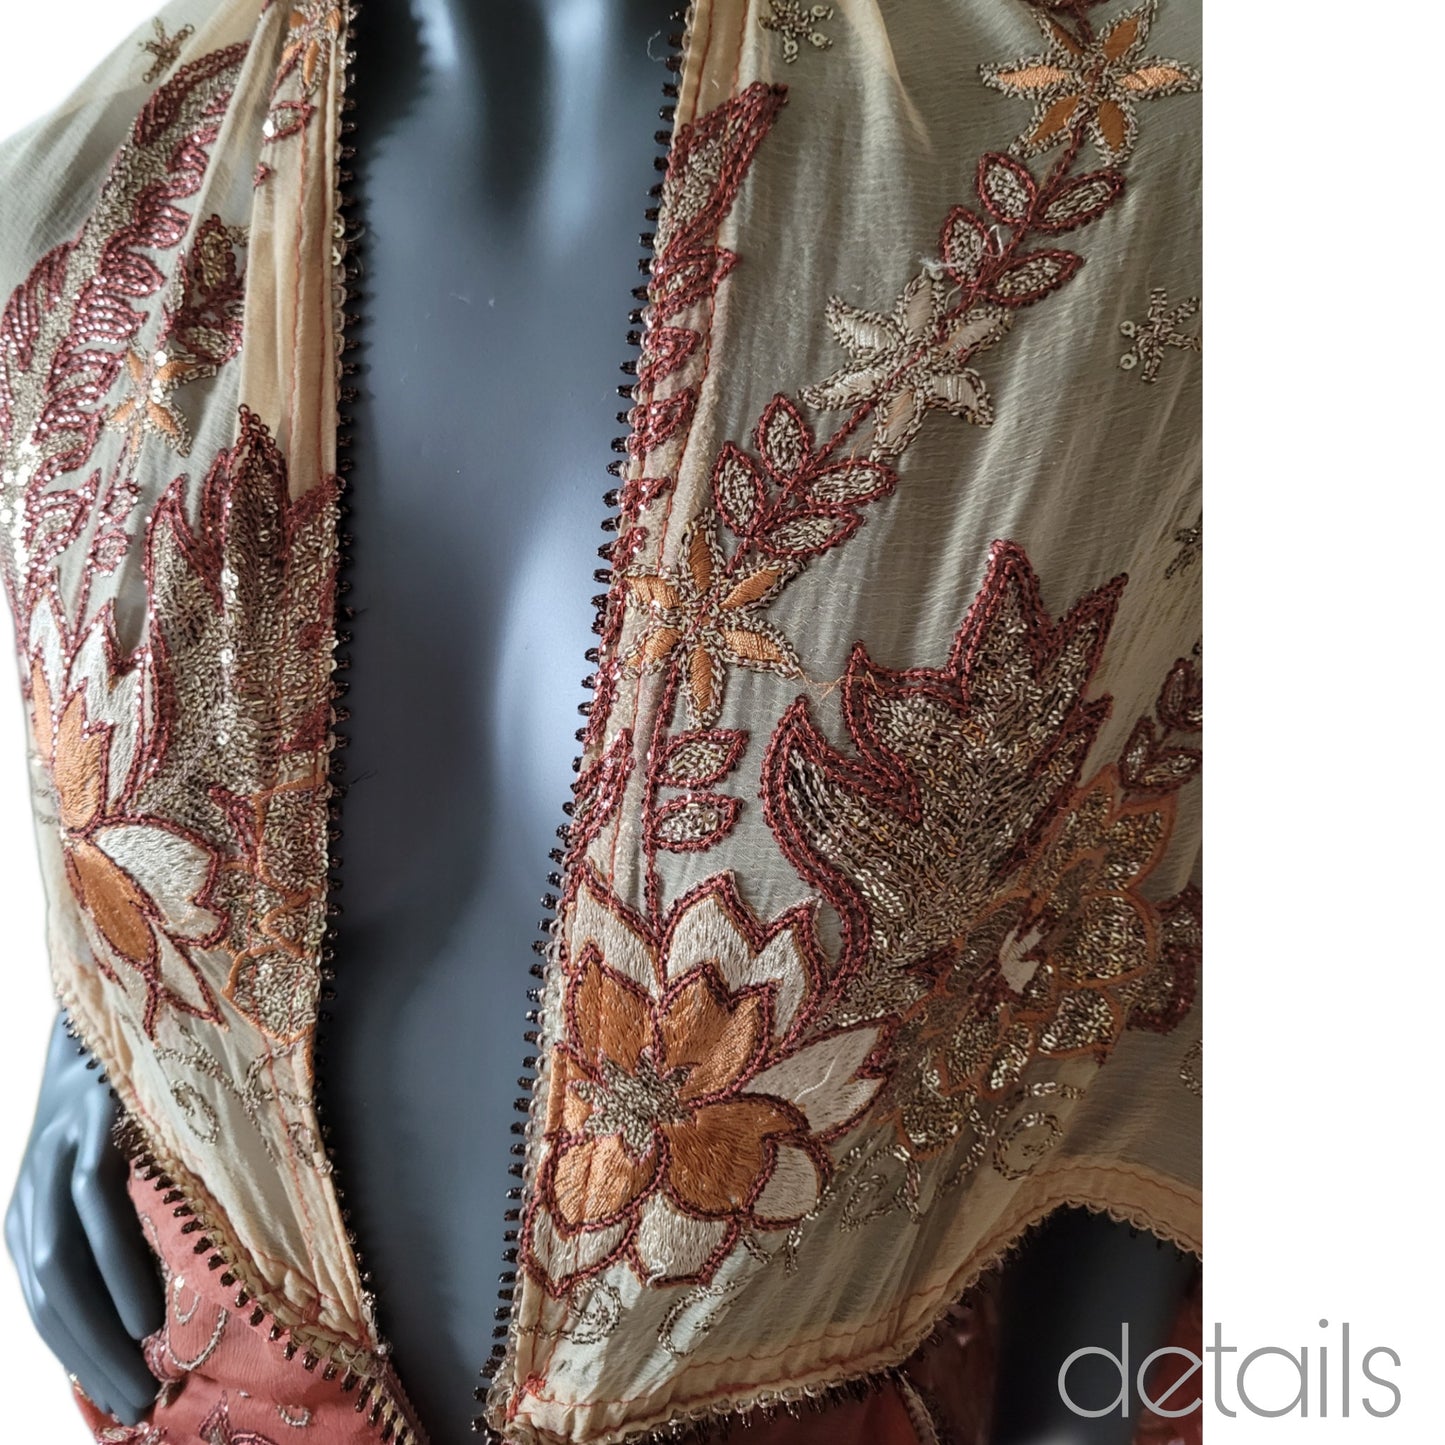 Draped kimono, dark caffe latte and light rust with elaborated embrodery in antique gold sequins and shades of brown (M)